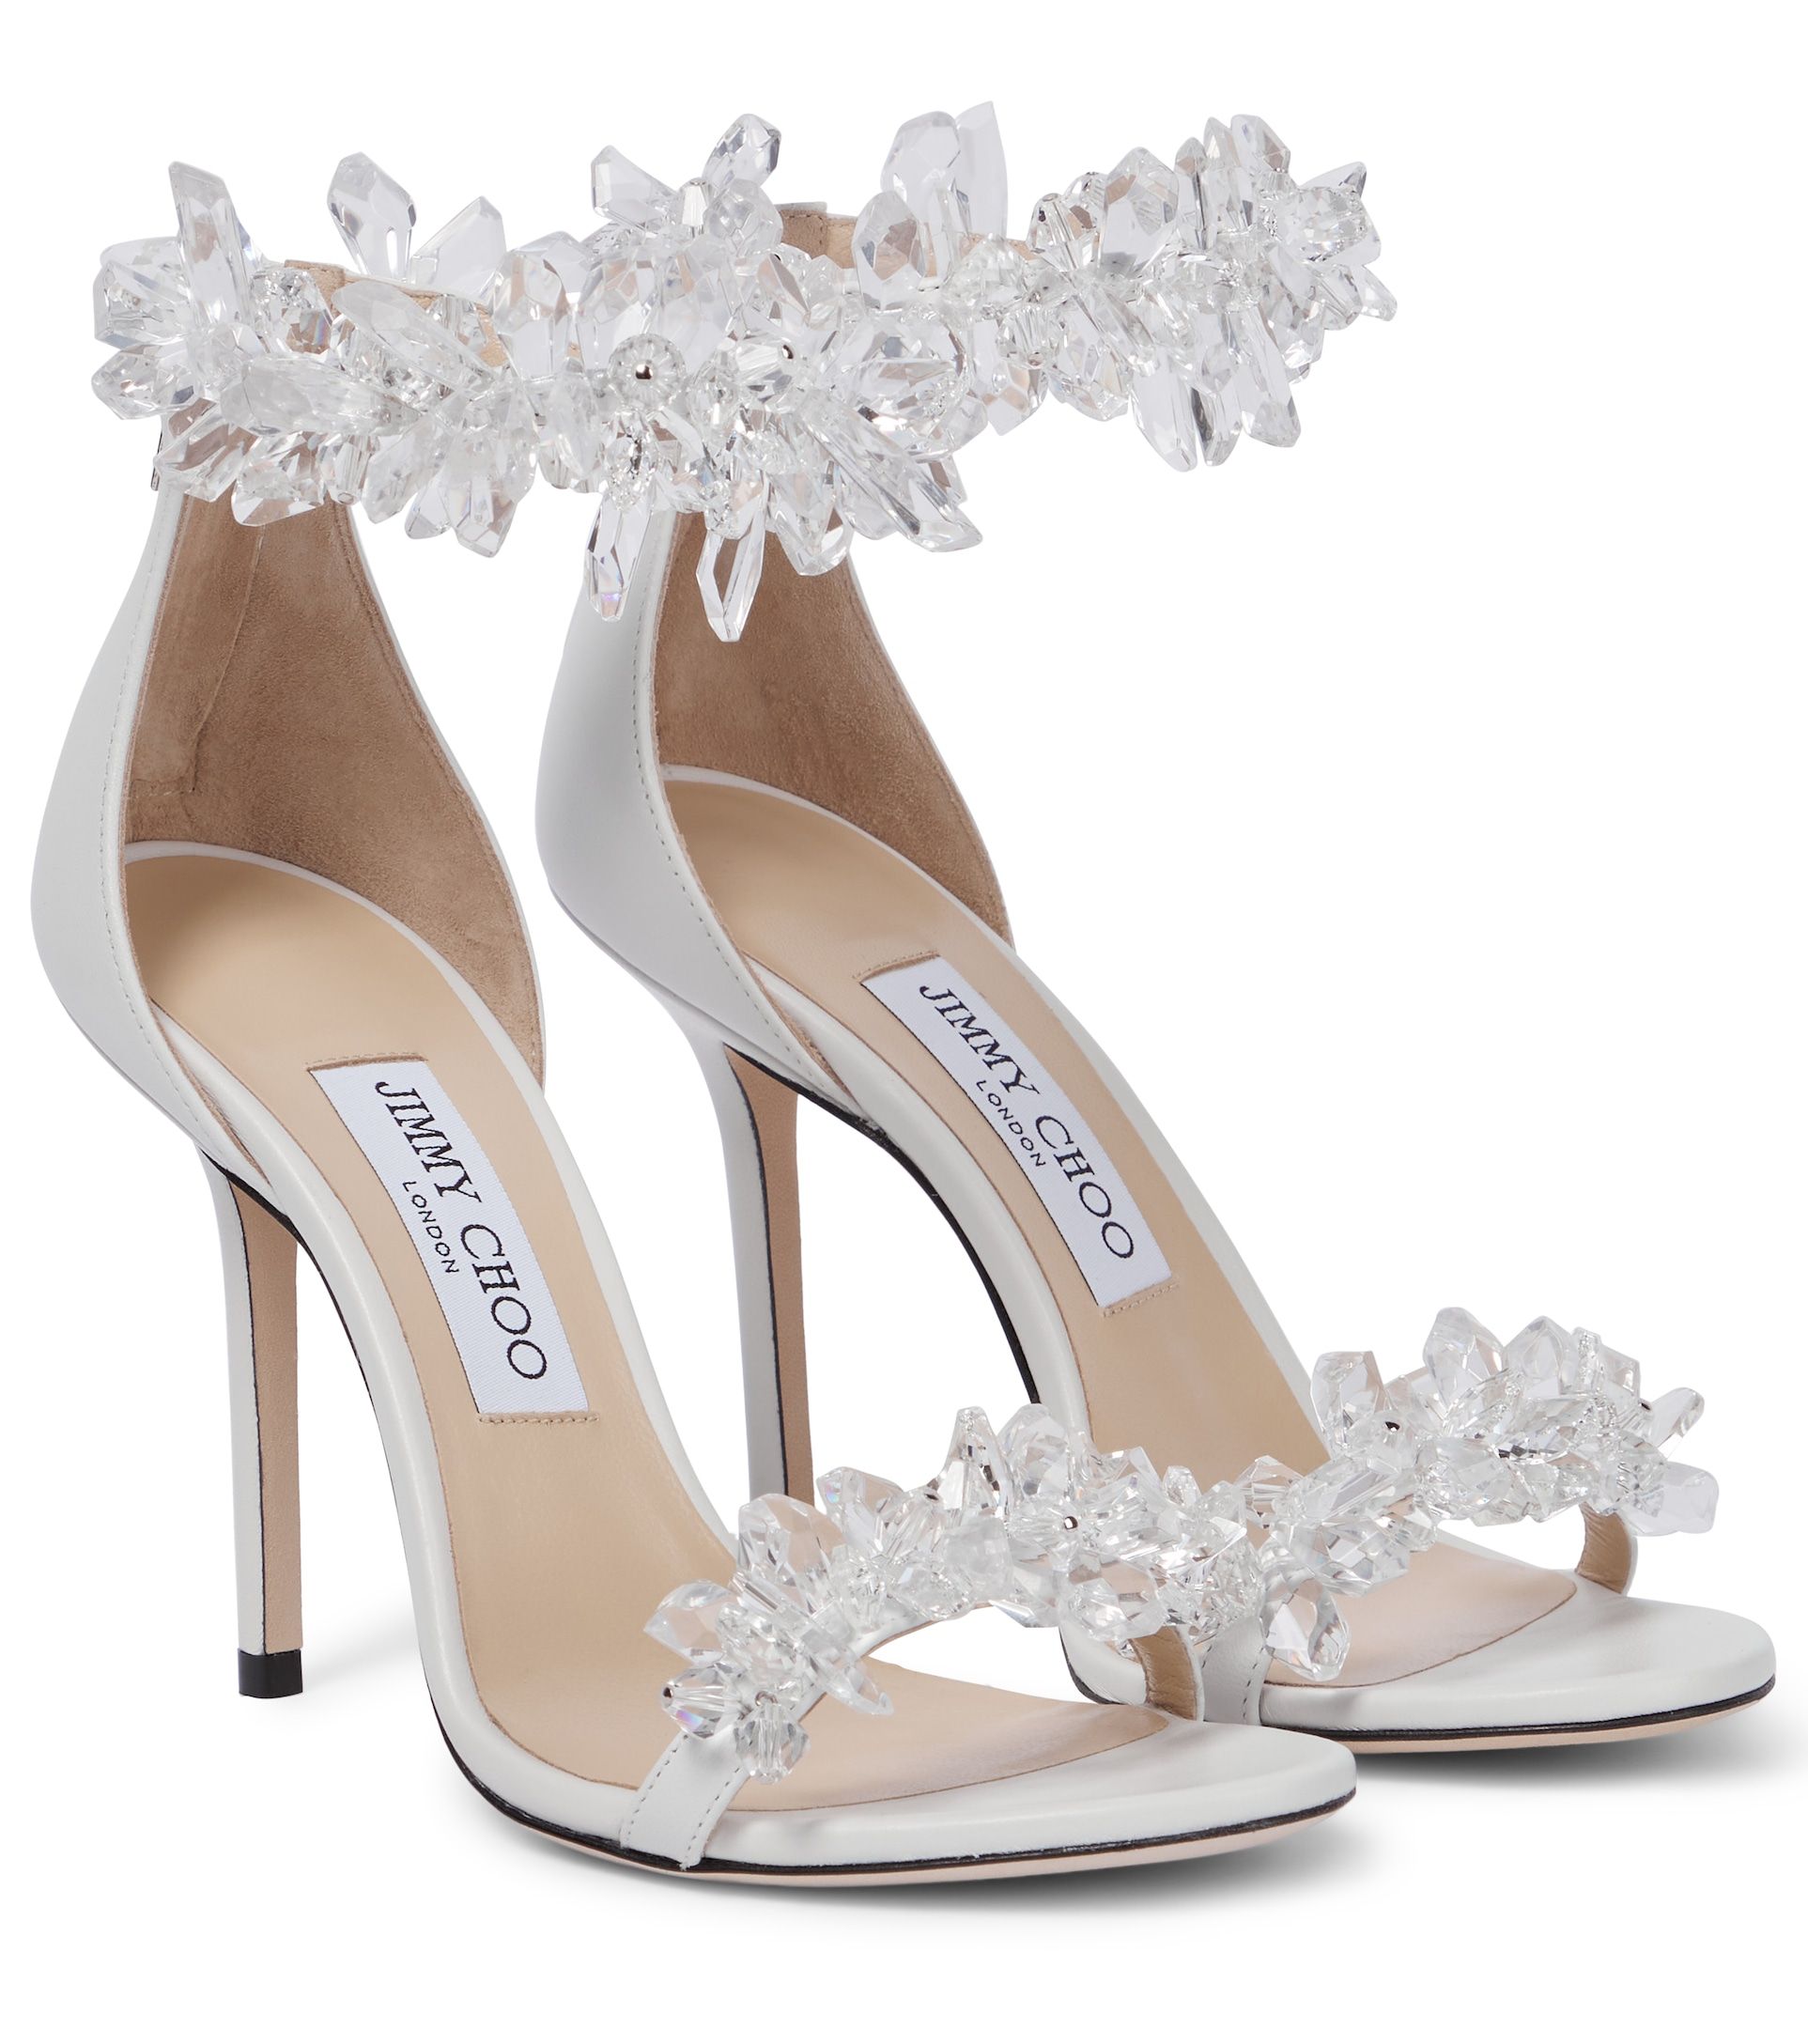 10 Bridal Wedding Shoe Trends for 2013 | Colorful wedding shoes, Wedding  shoe trend, Coloured wedding shoes